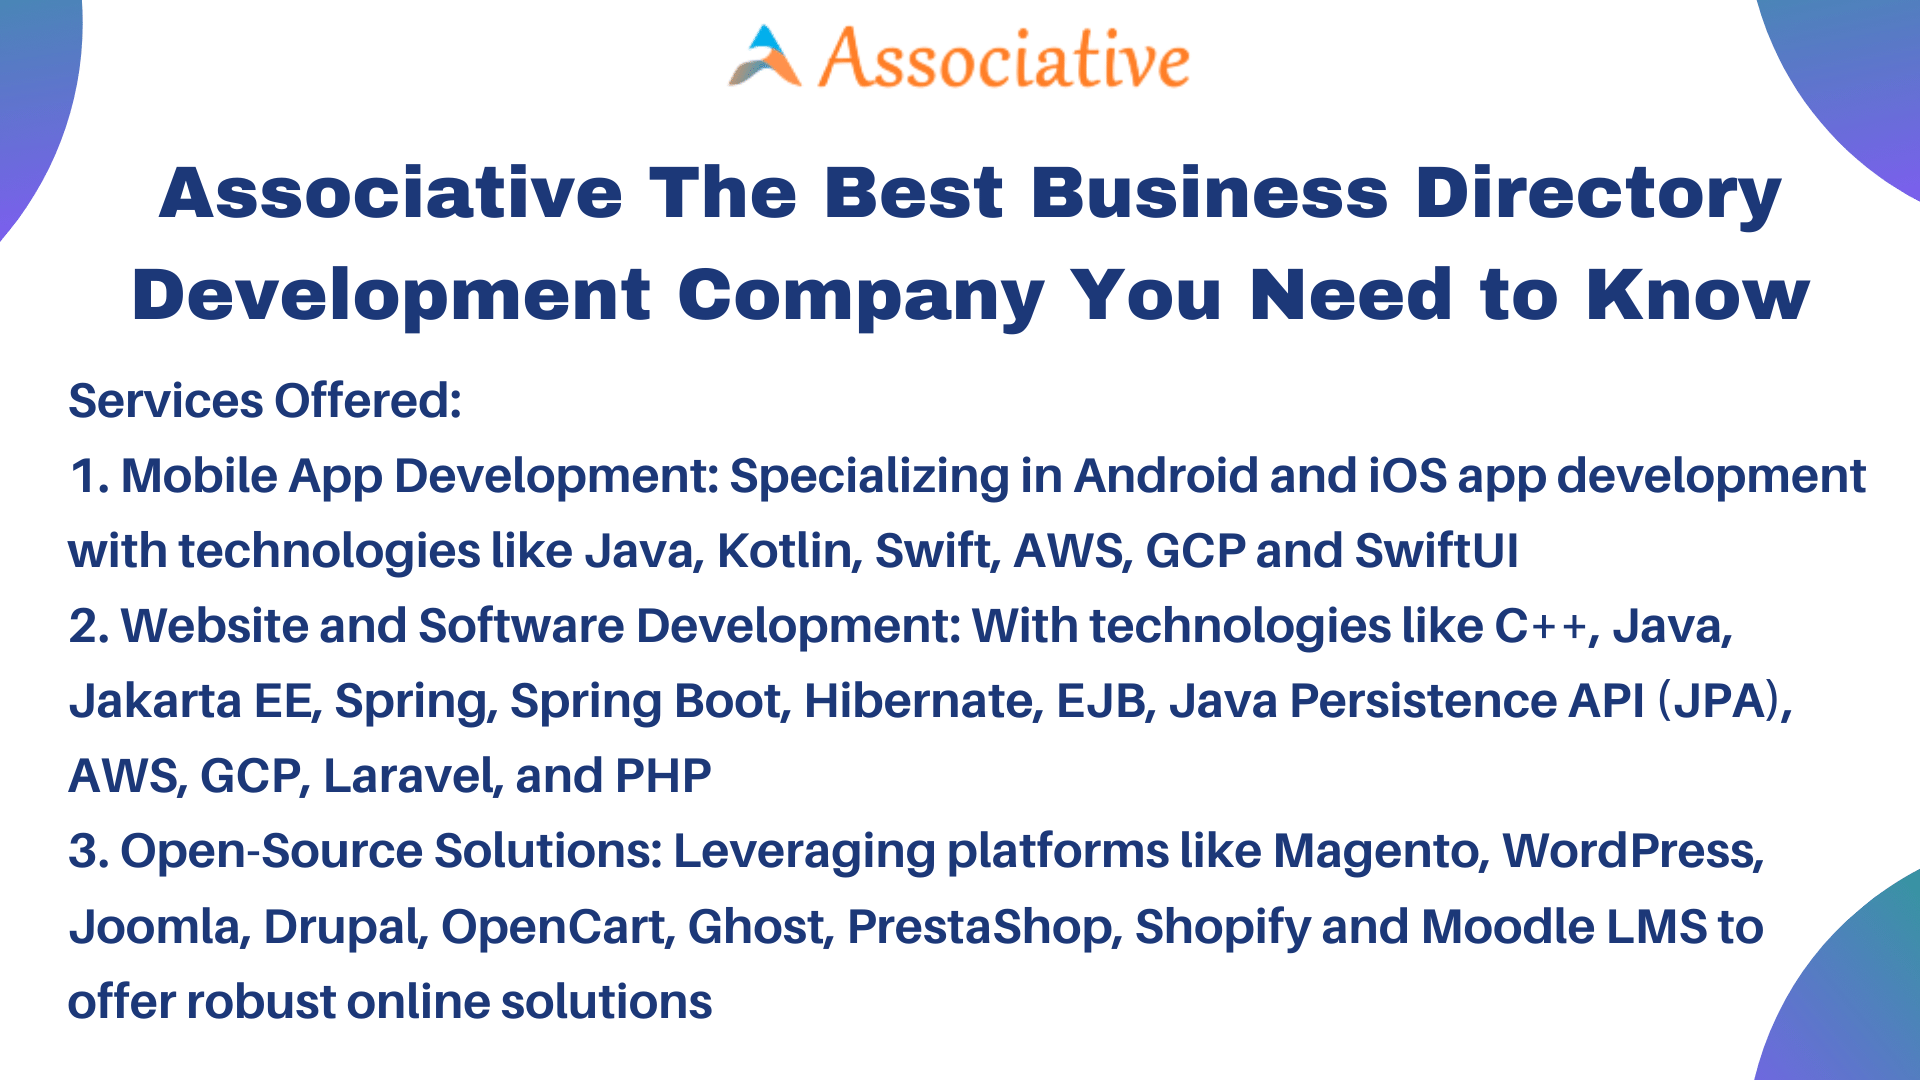 Associative The Best Business Directory Development Company You Need to Know